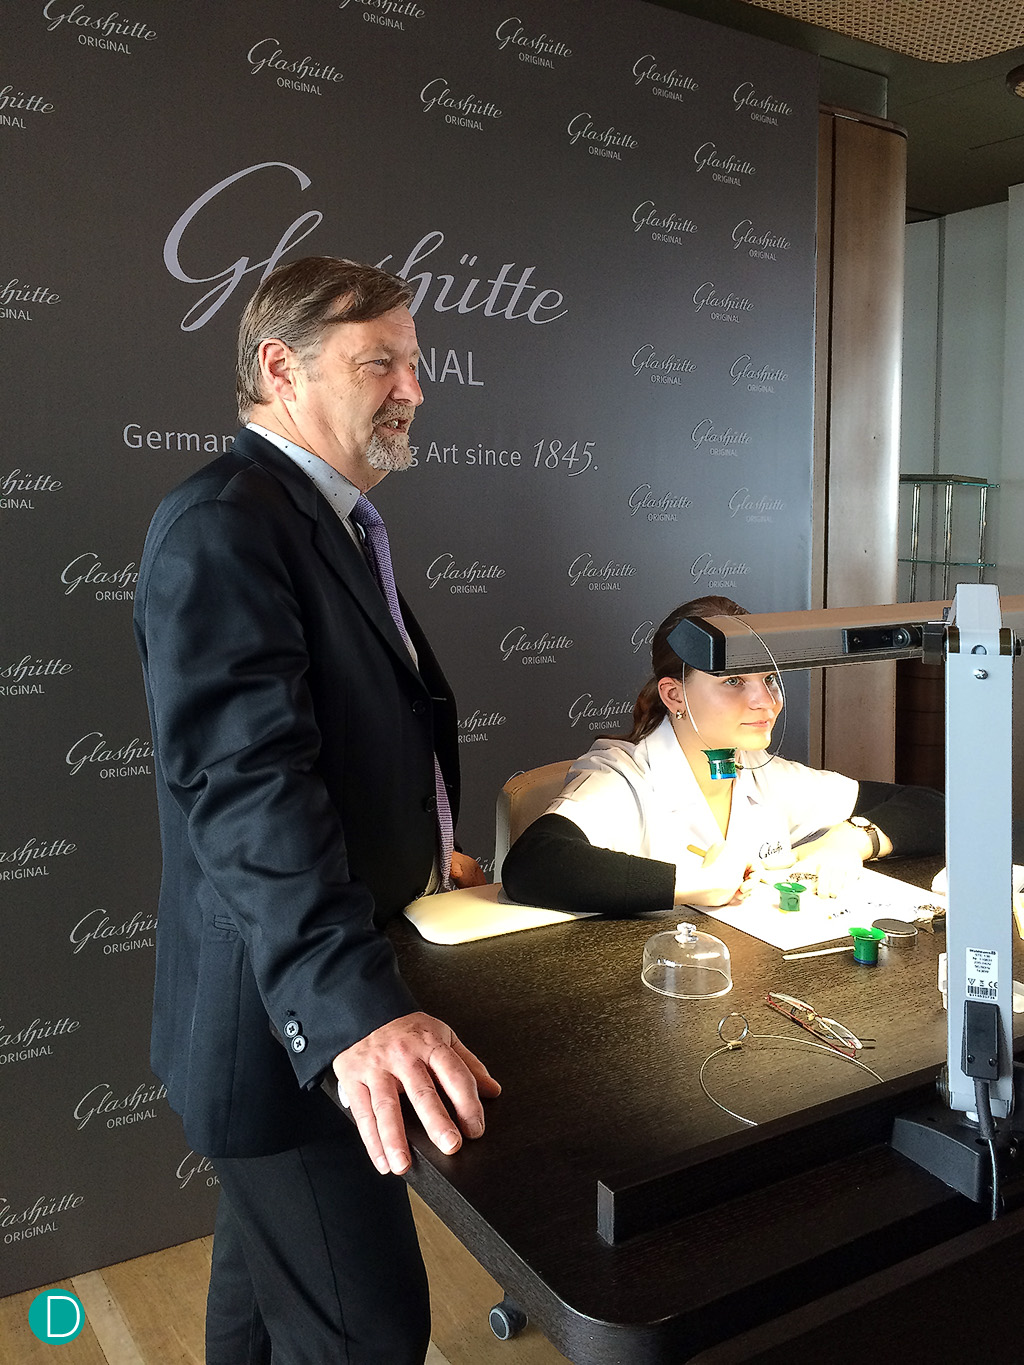 Yaan Gamard, CEO of Glashütte Original welcoming guests at the opening. A demonstration of watchmaking was also shown.